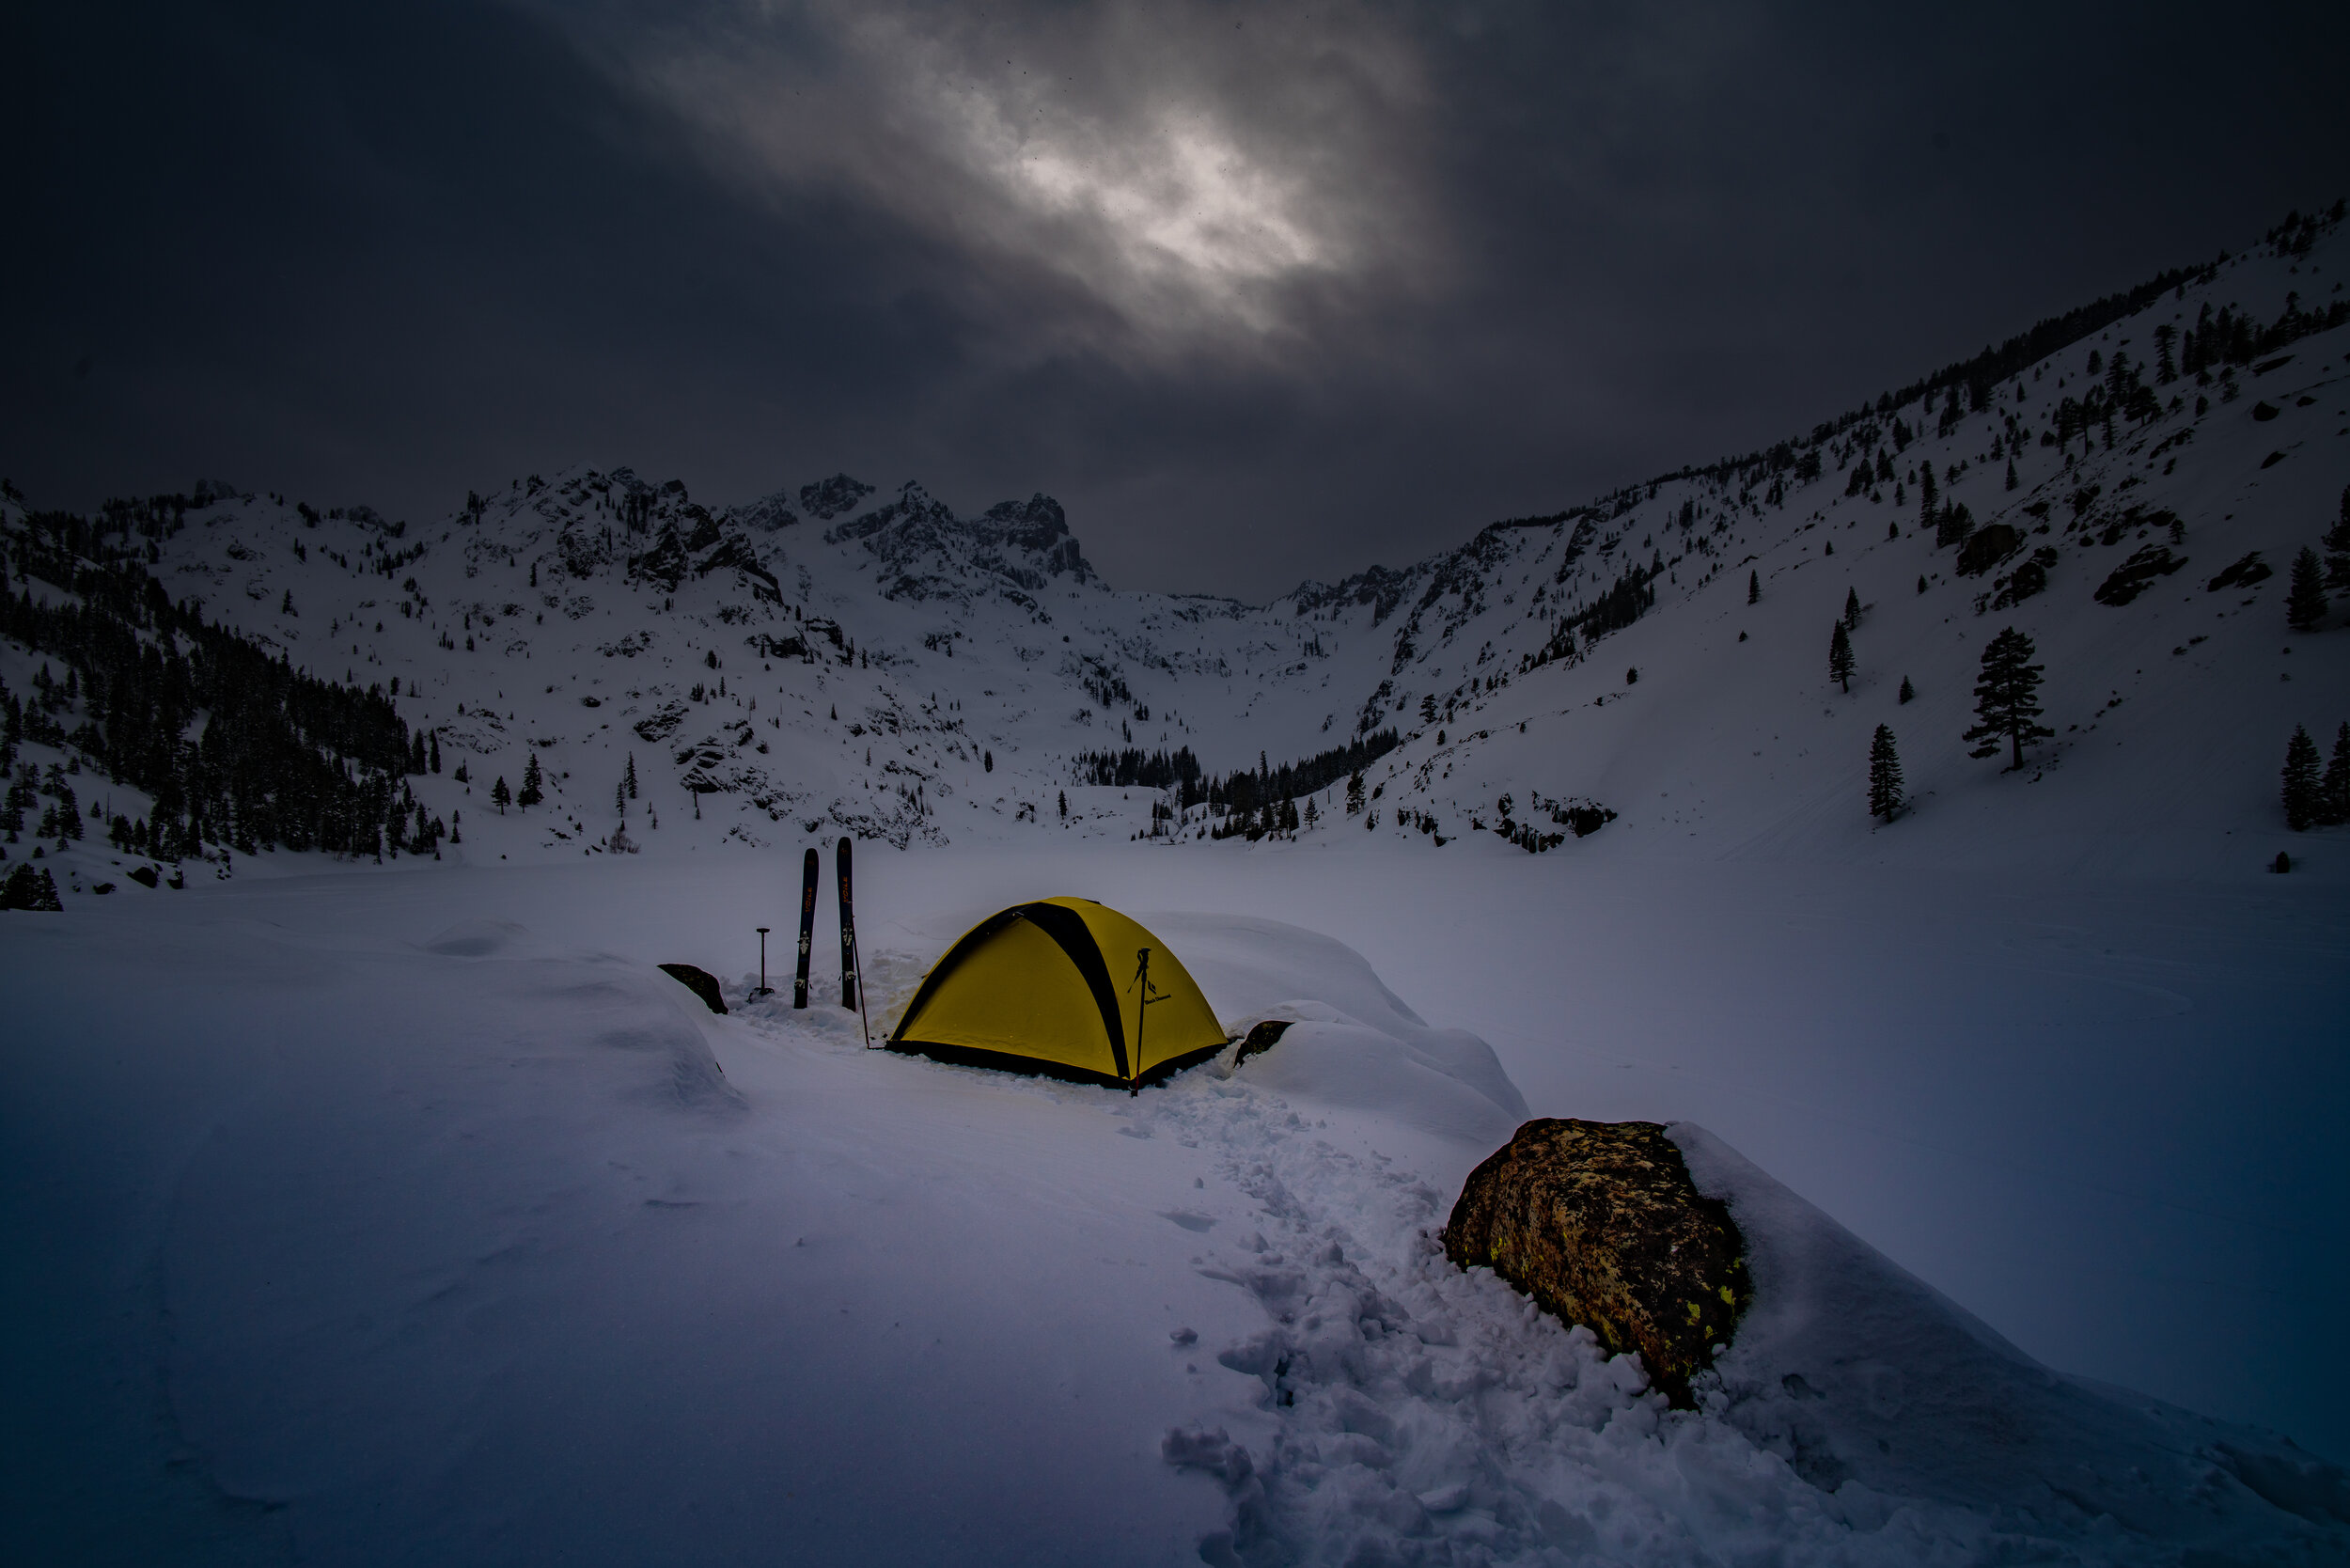  My camp at the base of the Sierra Buttes. The clouds begin to thicken. 